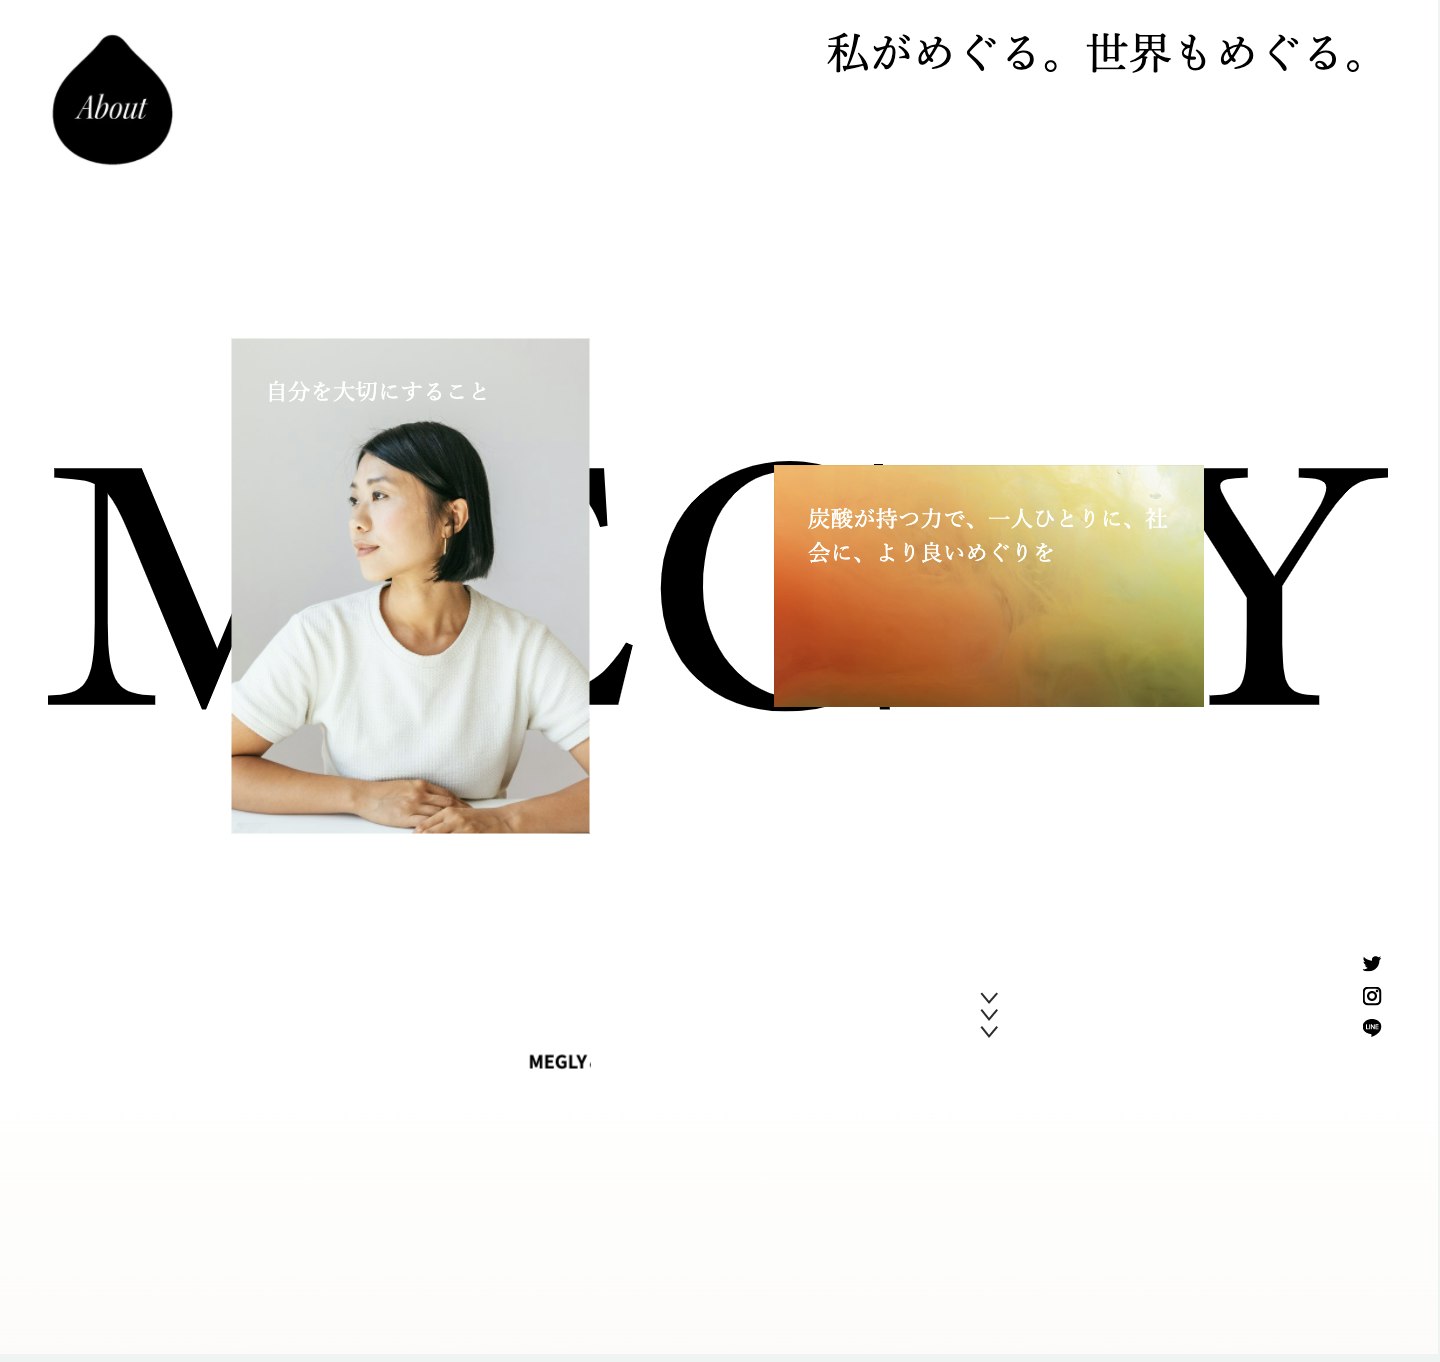 MEGLY&COサイト開発